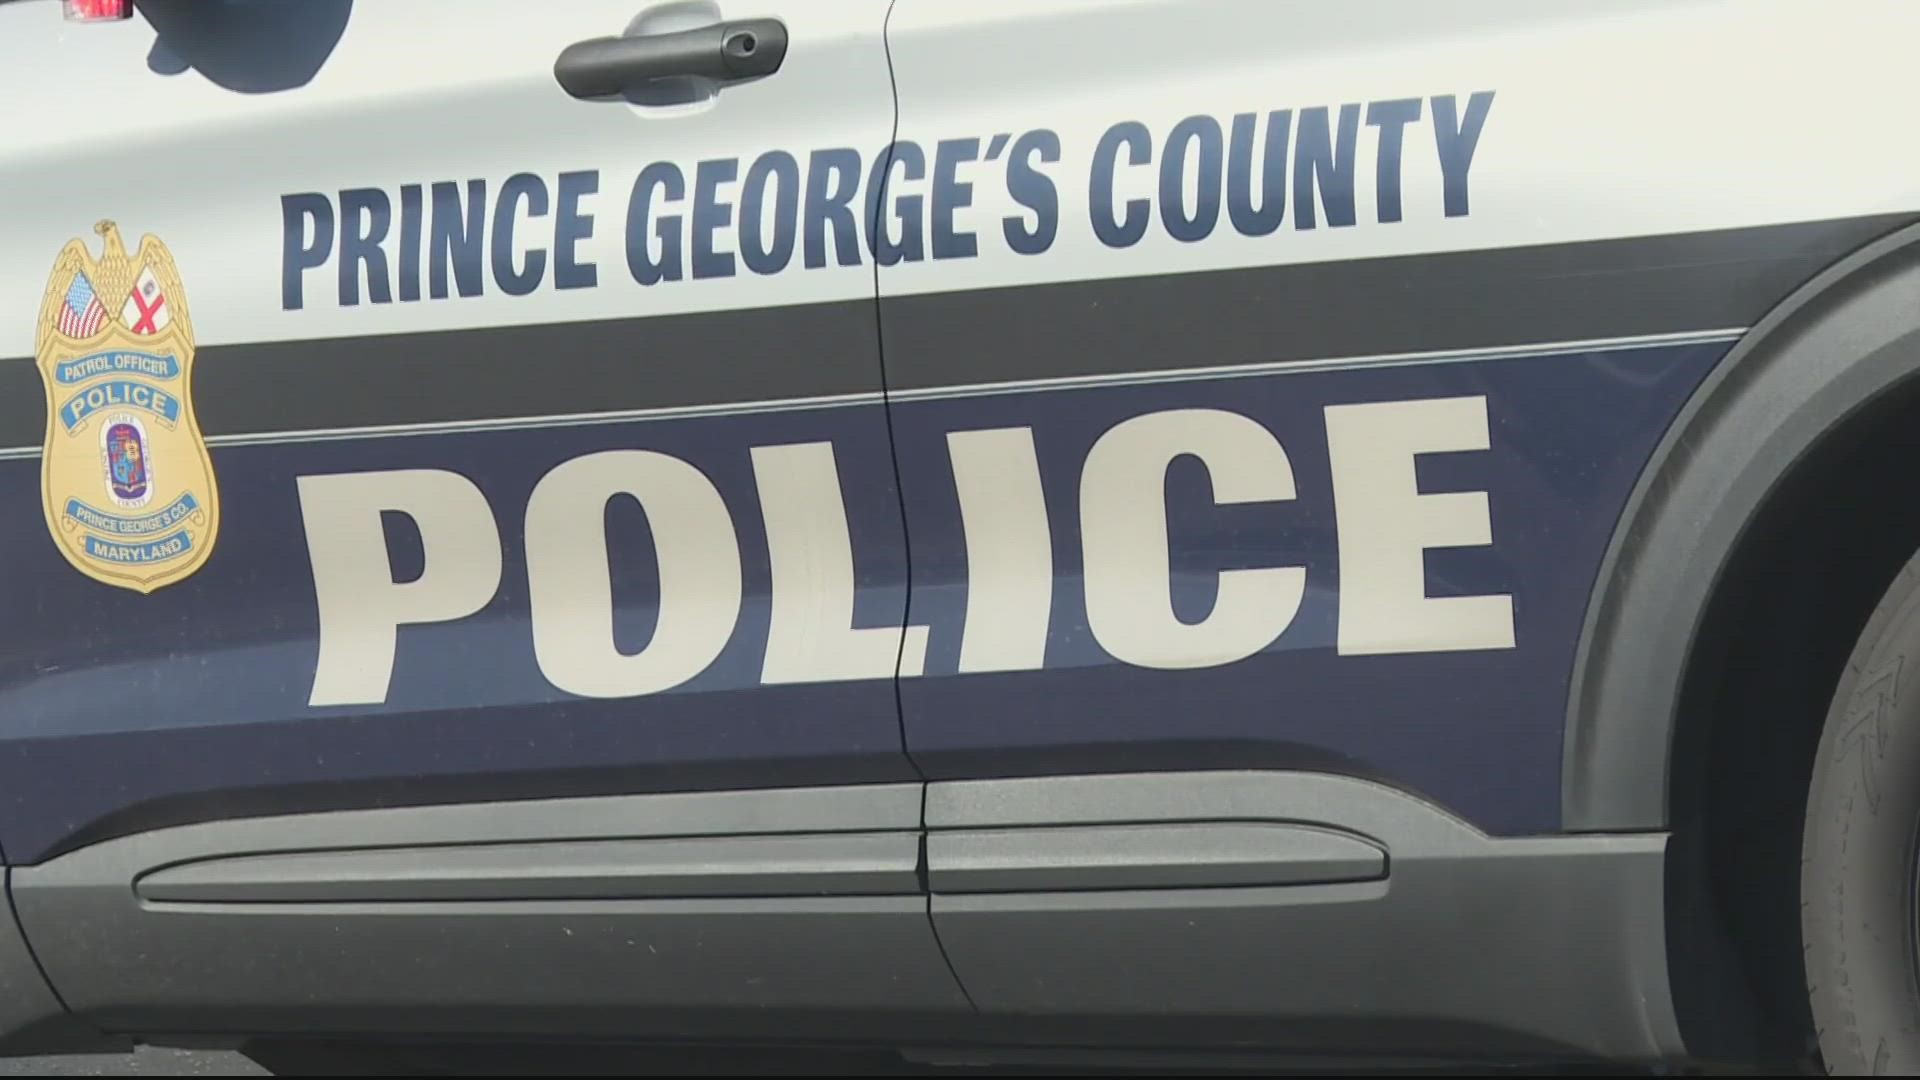 Prince George's County leaders met with residents on Saturday in a town hall meeting devoted to public safety.